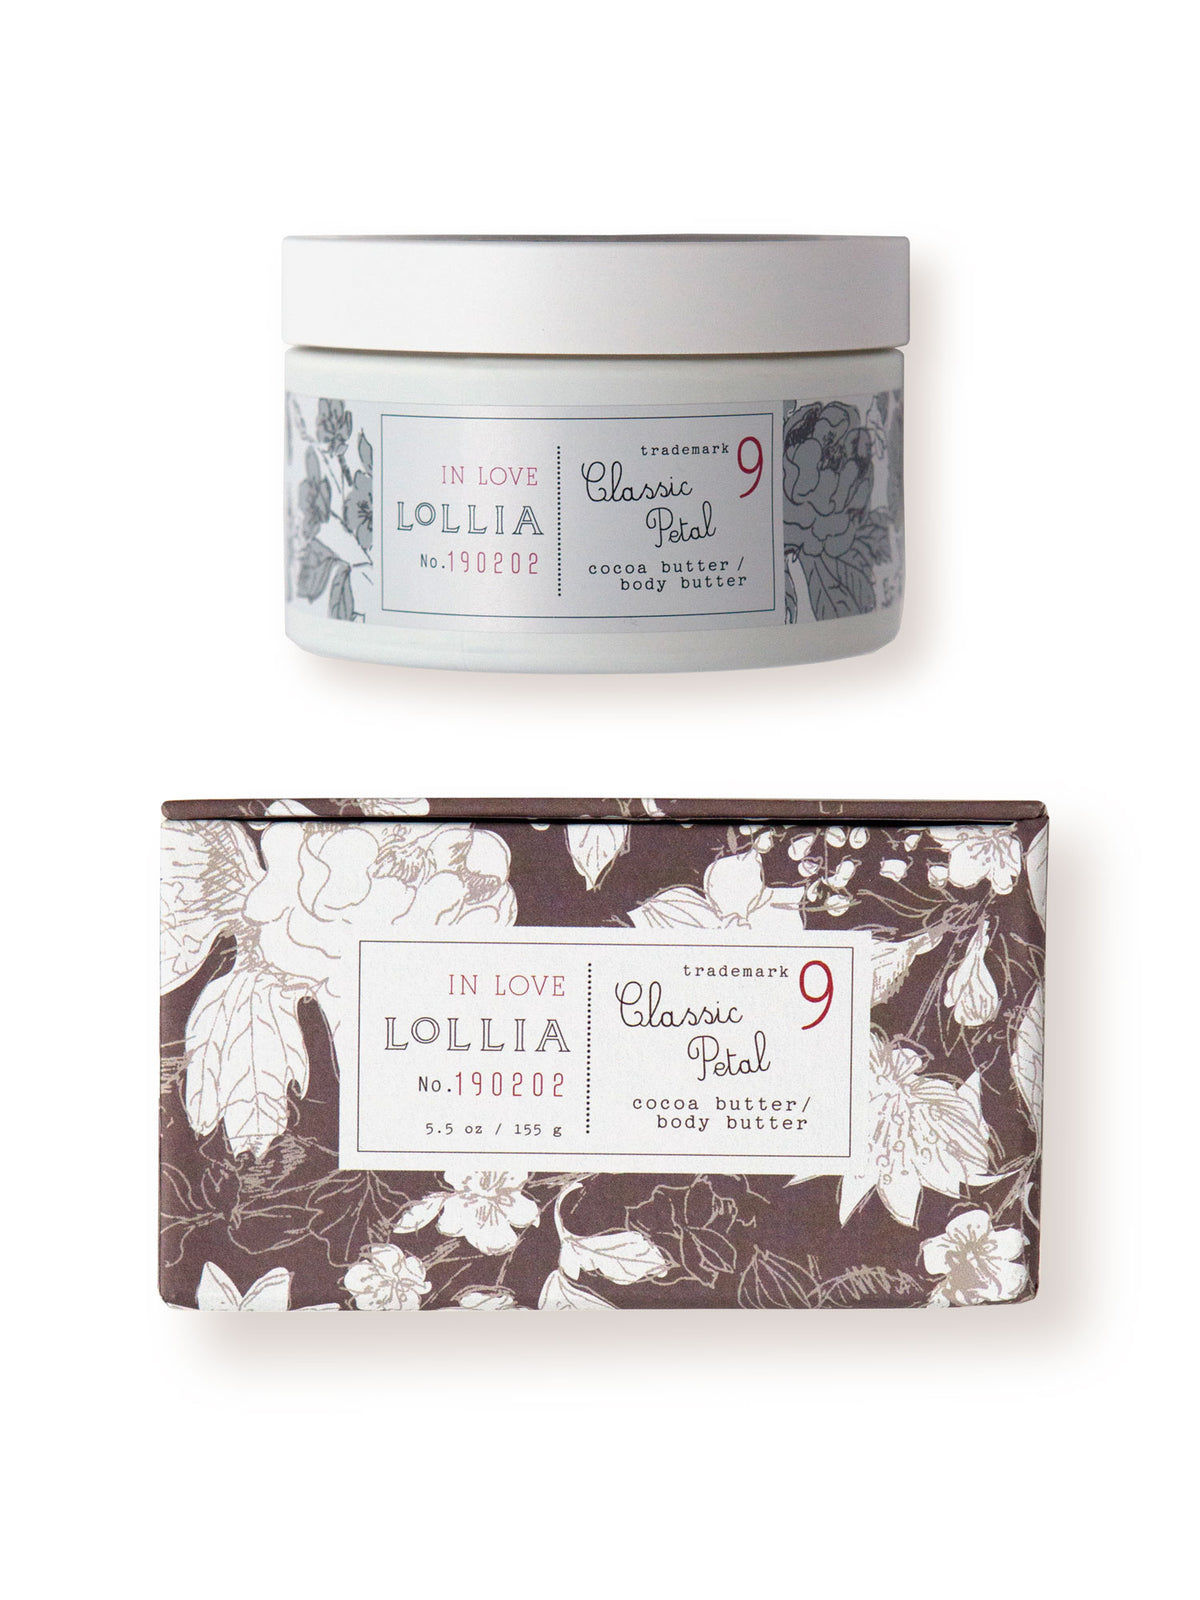 A container and a rectangular box of Margot Elena's Lollia In Love Body Butter with "classic petal" scent. The packaging features a floral design in shades of white and grey.